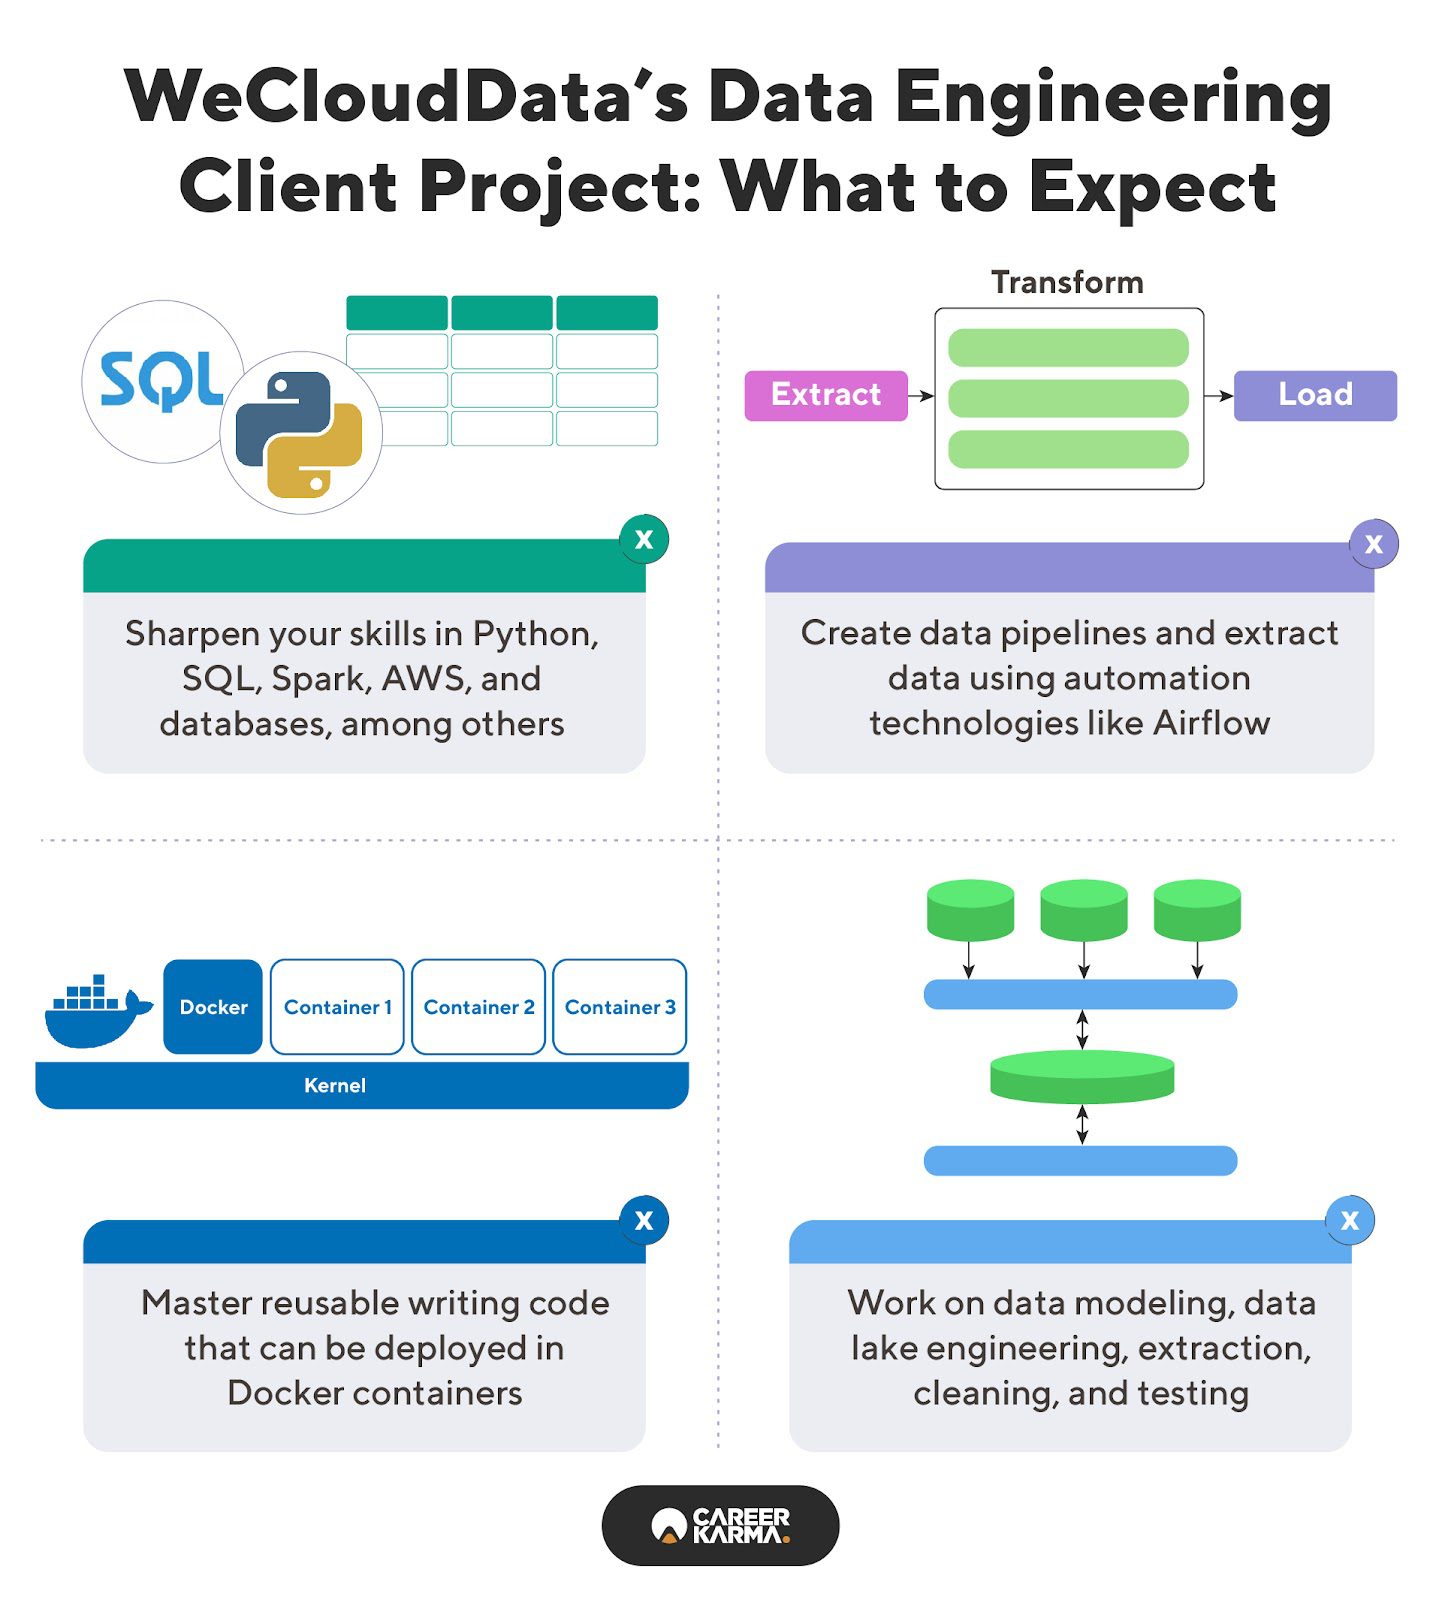 An infographic showing what you’ll expect from WeCloudData’s Data Engineering Client Project